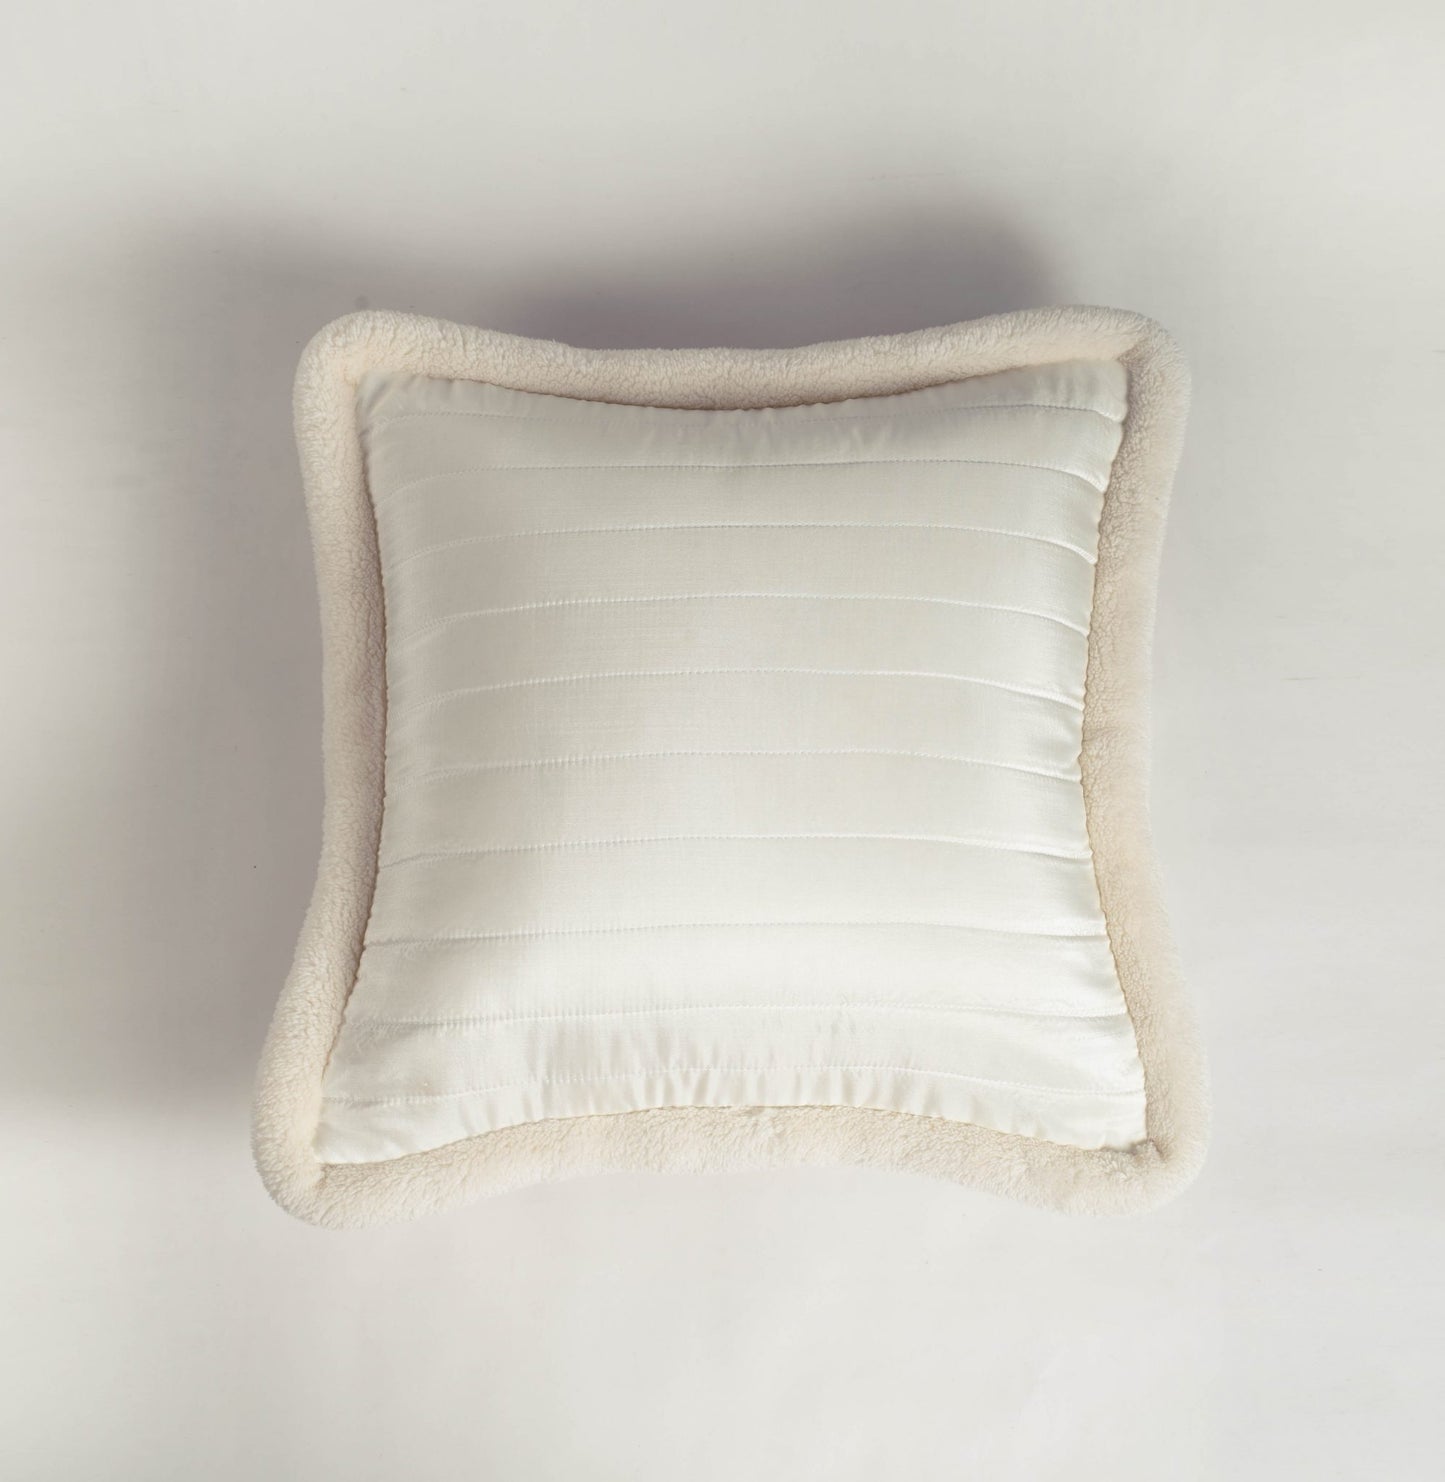 Svenska - White cushion cover, quilted, faux silk pillow